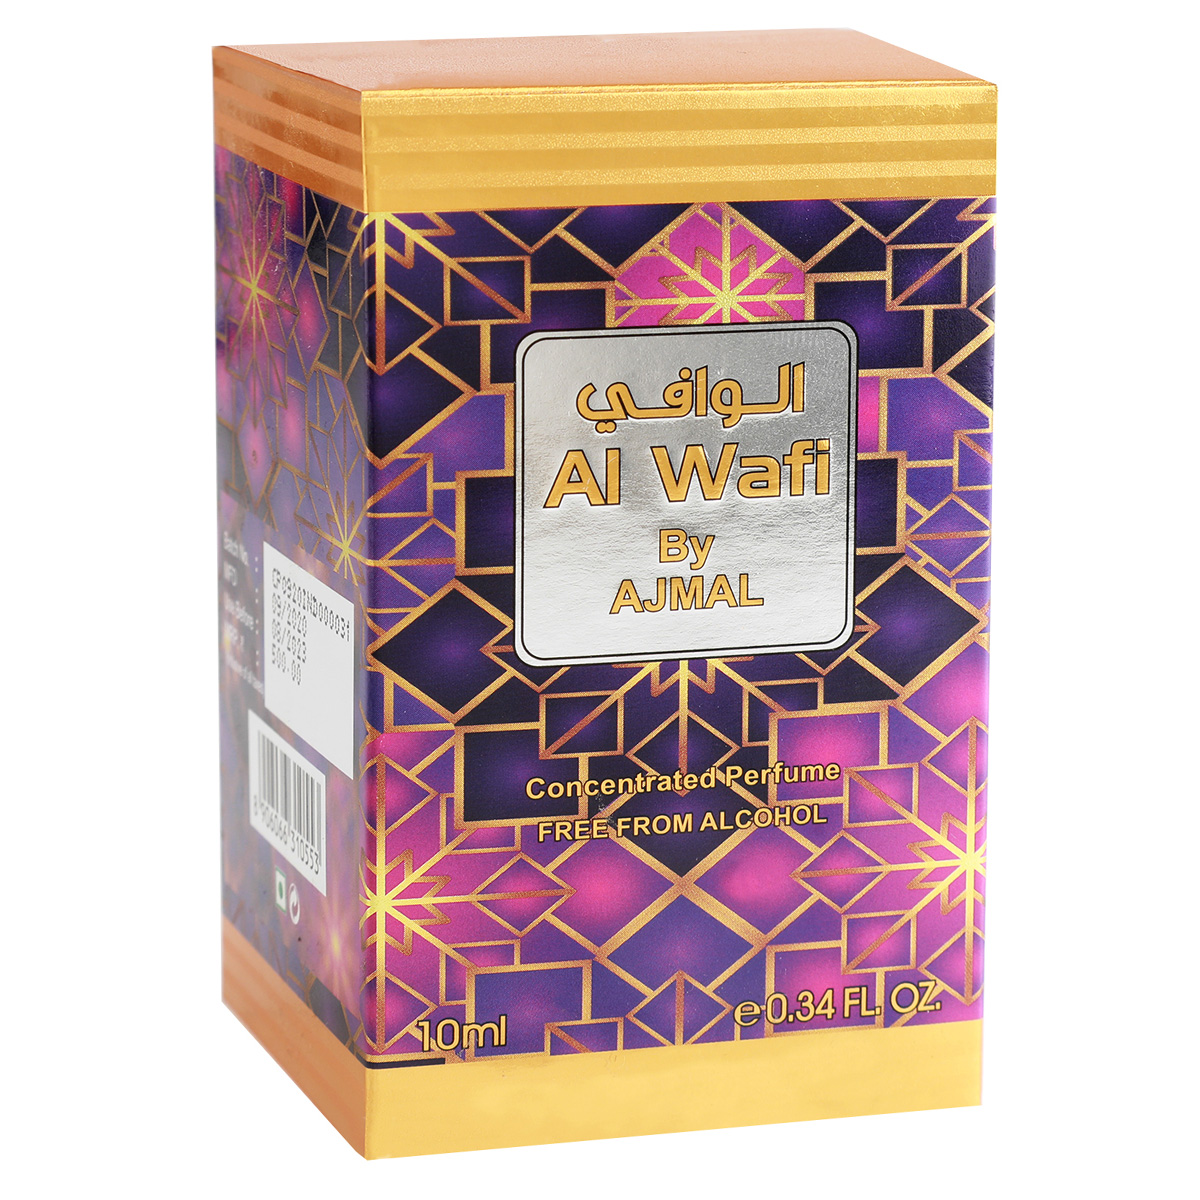 Ajmal Al wafi Concentrated Perfume Free From Alcohol, 10ml